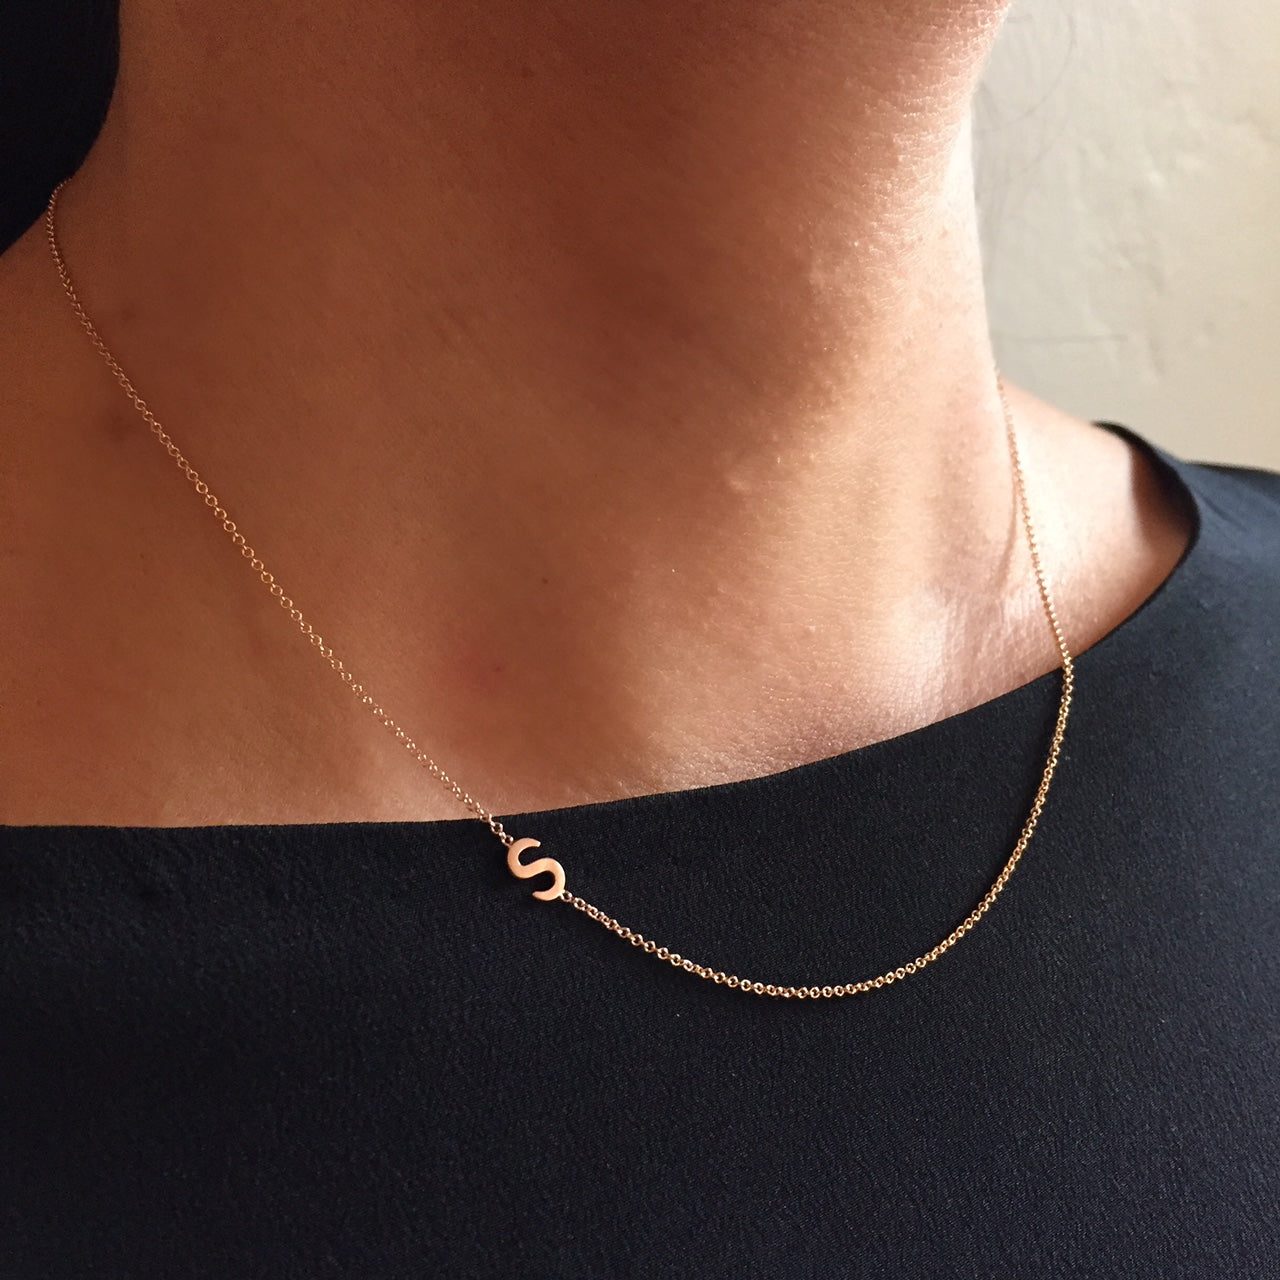 Asymmetrical R Initial Necklace